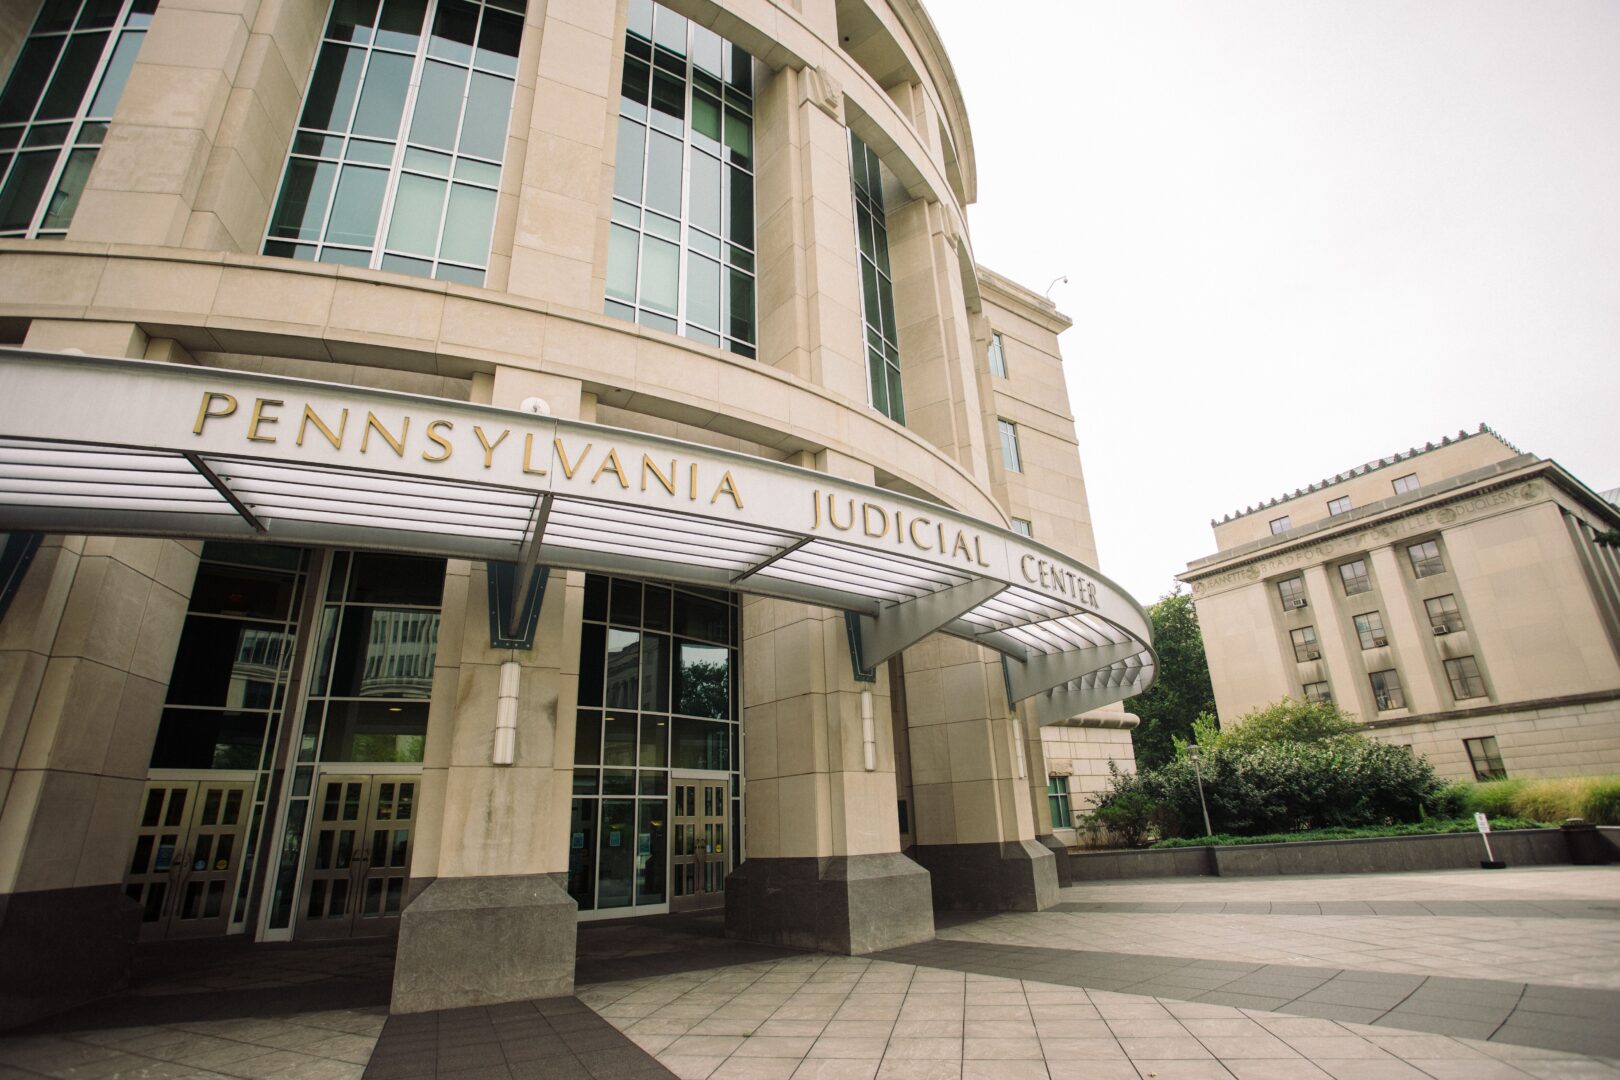 The entrance to the Pennsylvania Judicial Center. In May, voters will choose their parties' candidates to compete for an open seat on the commonwealth's highest court.